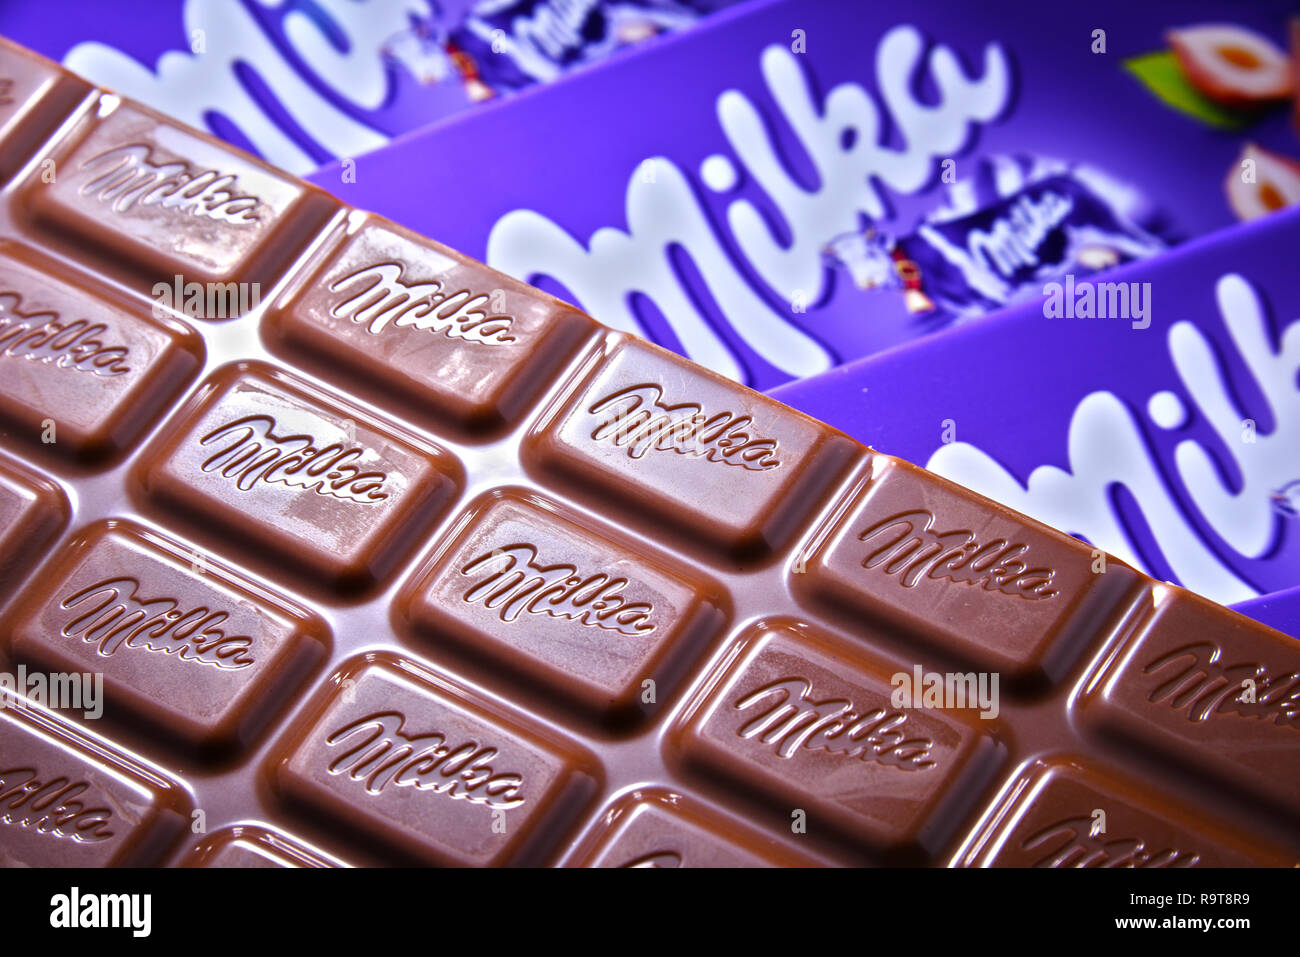 POZNAN, POL - JUN 15, 2018: Milka chocolates, a brand of chocolate confection which originated in Switzerland in 1825 and since 1990 has been manufact Stock Photo